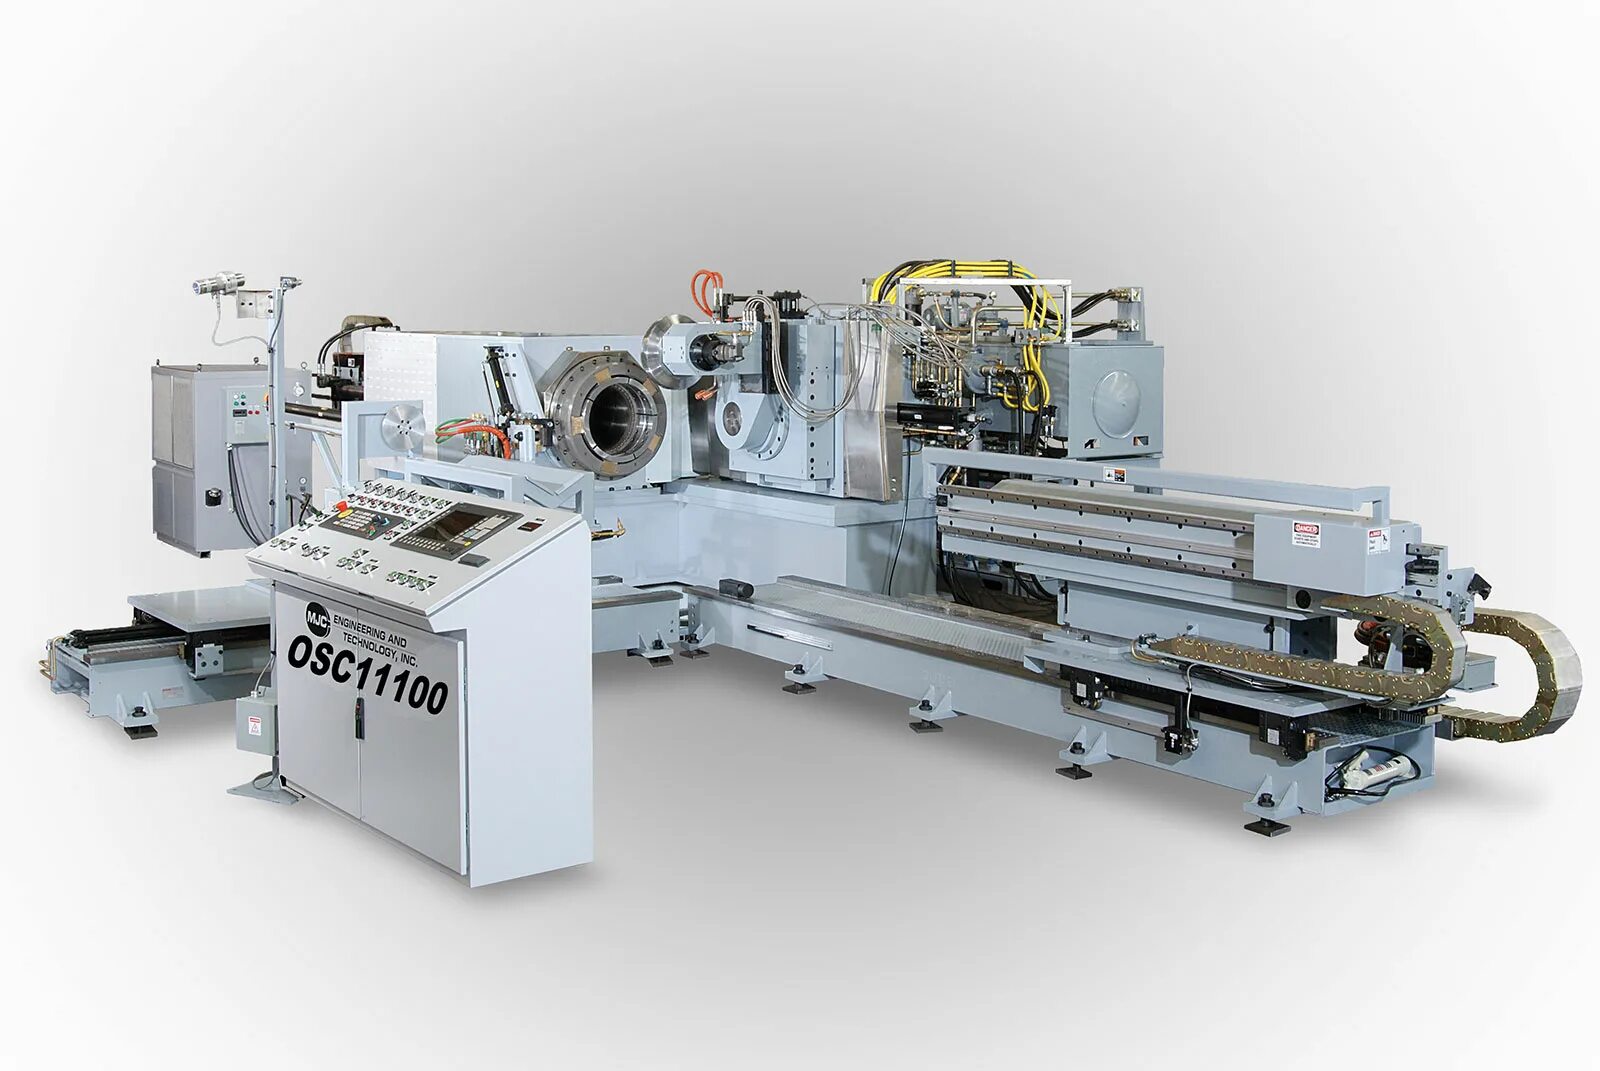 Spinner станок с ЧПУ. Станок Spin turn. CNC forming-Spinning Machine. Heavy-Duty CNC Steel Pipe reduction Machines.